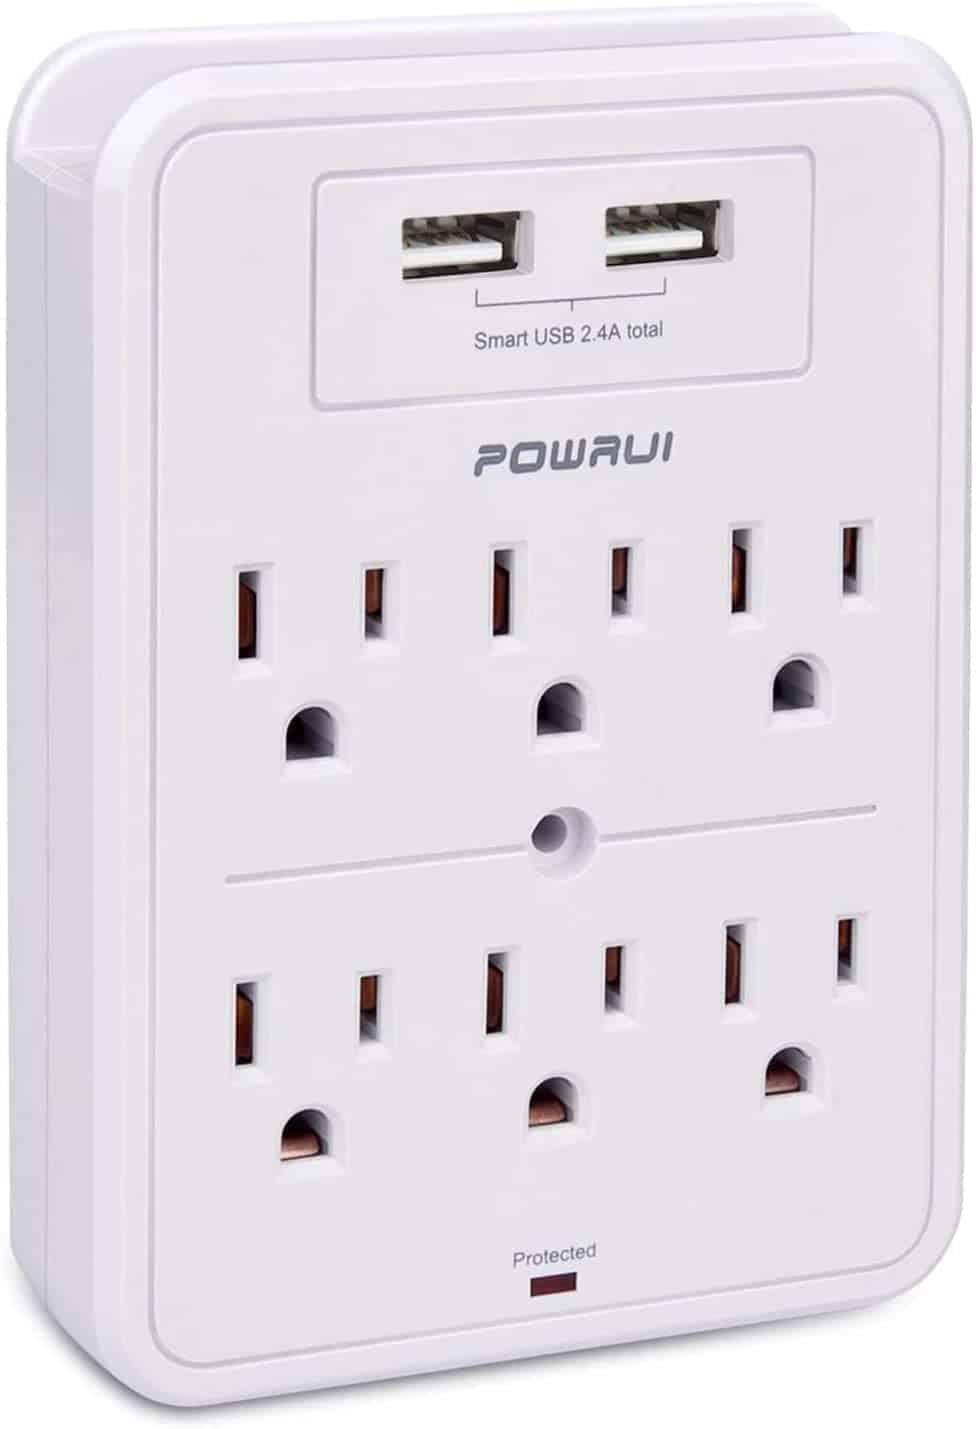 POWRUI Wall Charger w/ Surge Protection & USB Ports ONLY $11.02!